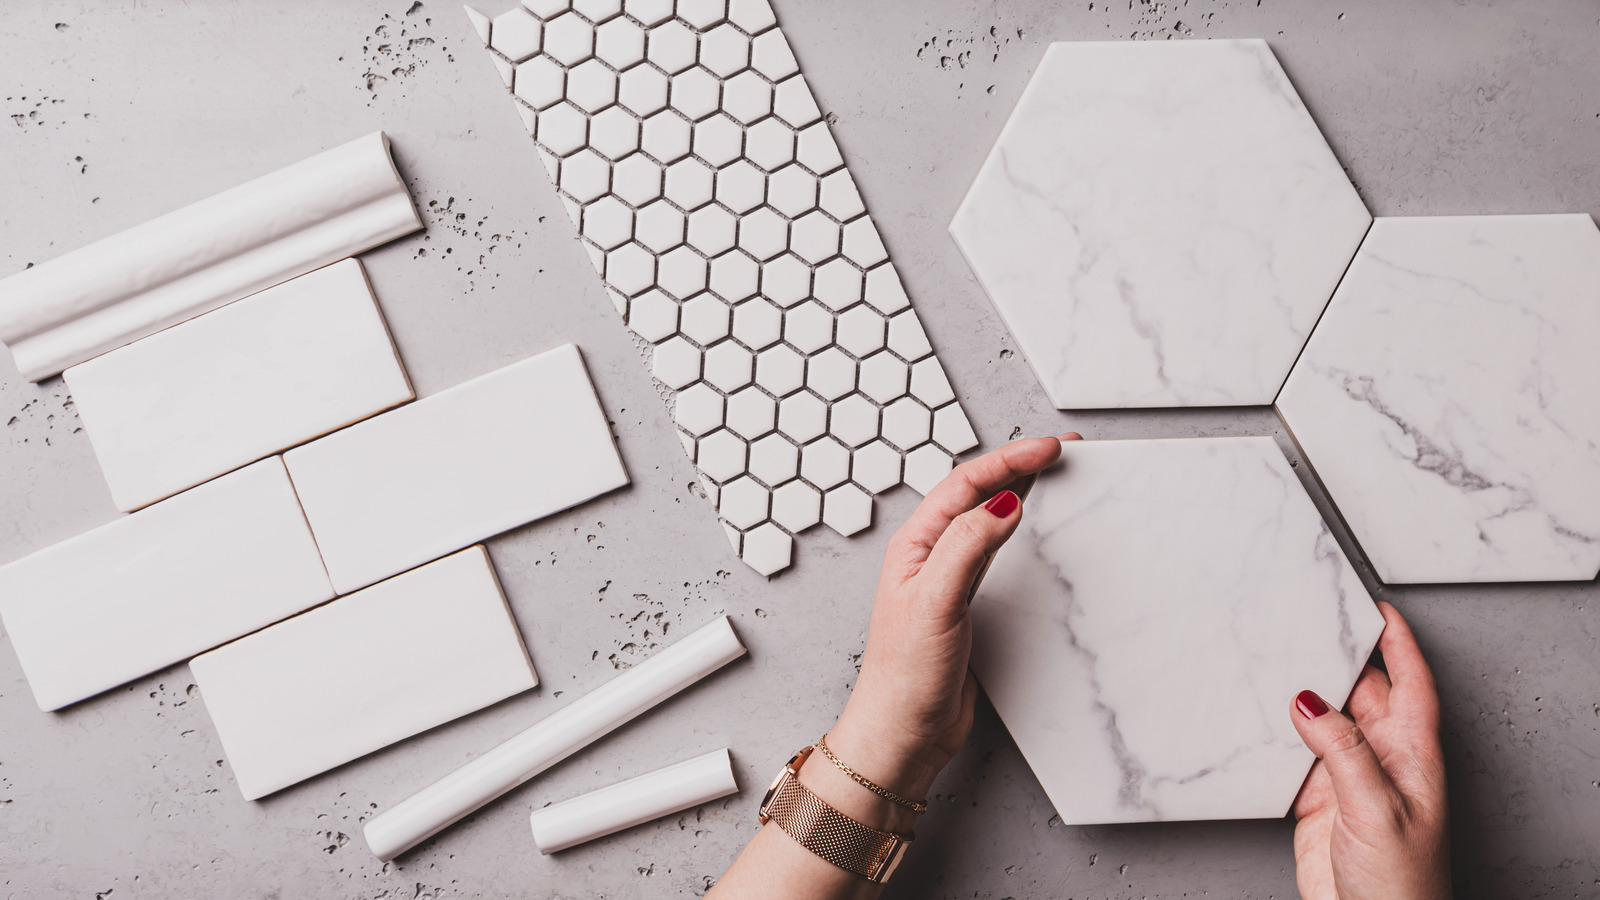 5 Genius Ways To Use Your Leftover Tiles